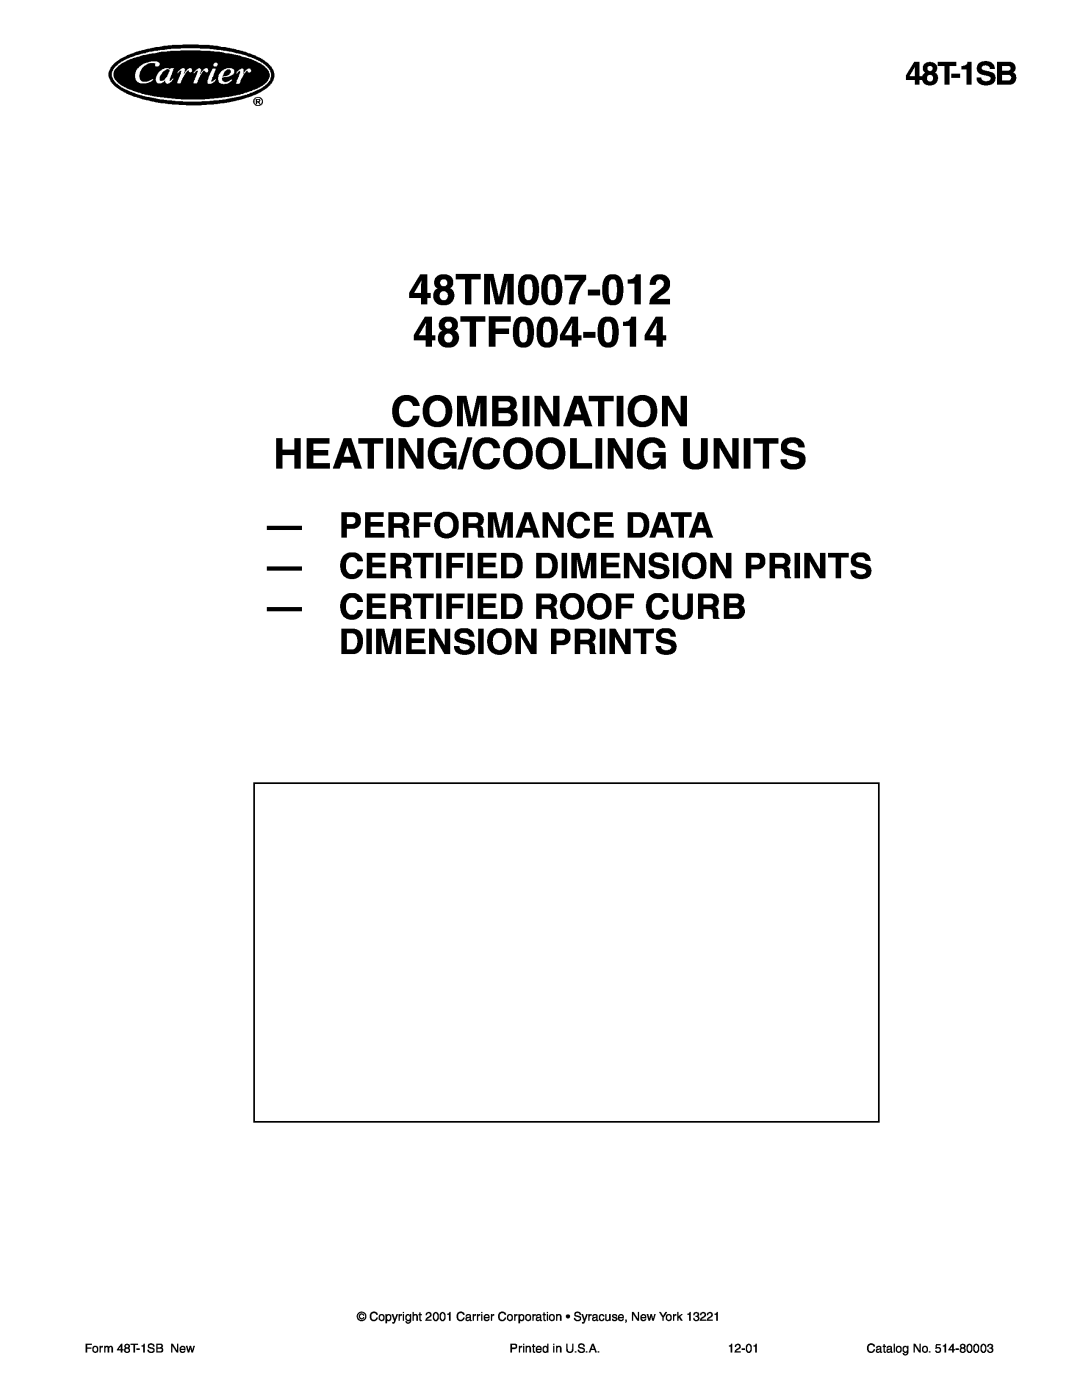 Carrier manual 48TM007-012 48TF004-014 COMBINATION, Heating/Cooling Units, Performance Data -Certified Dimension Prints 